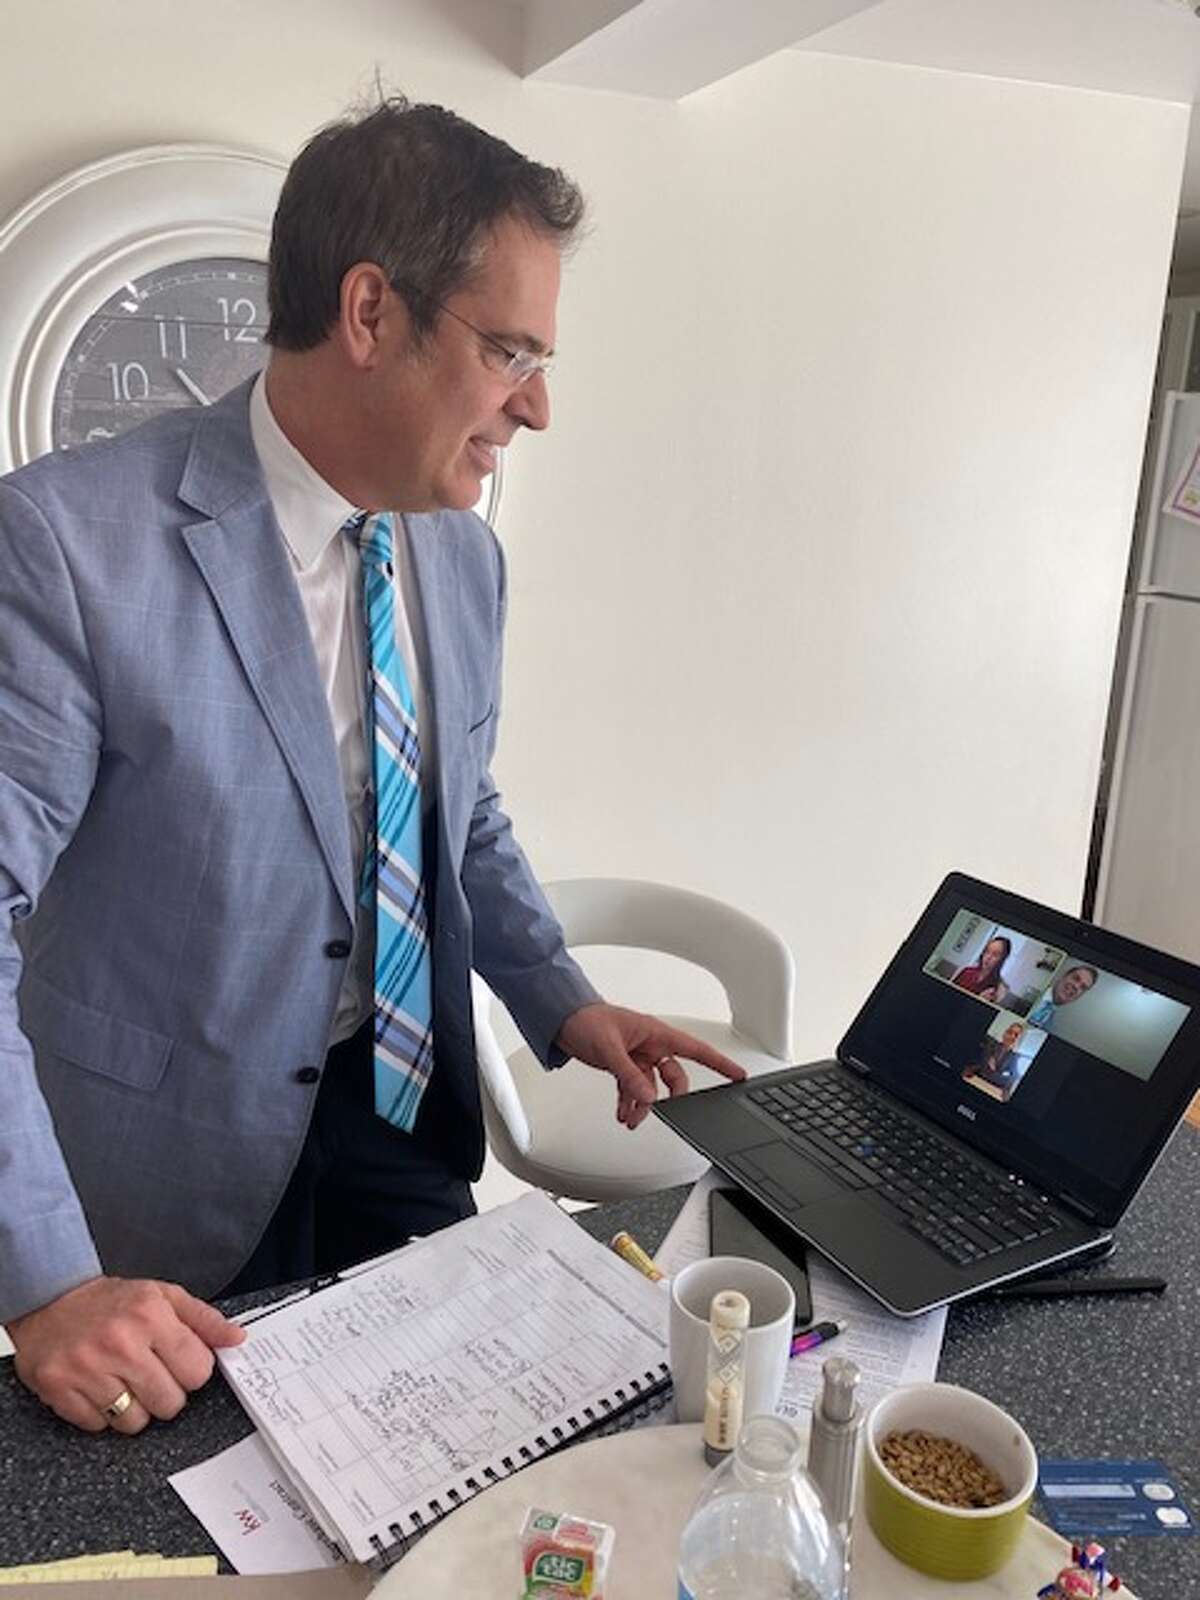 Real estate agent Scott Varley is using the video conferencing platform Zoom to meet with clients, fellow agents and staff during the coronavirus quarantine.